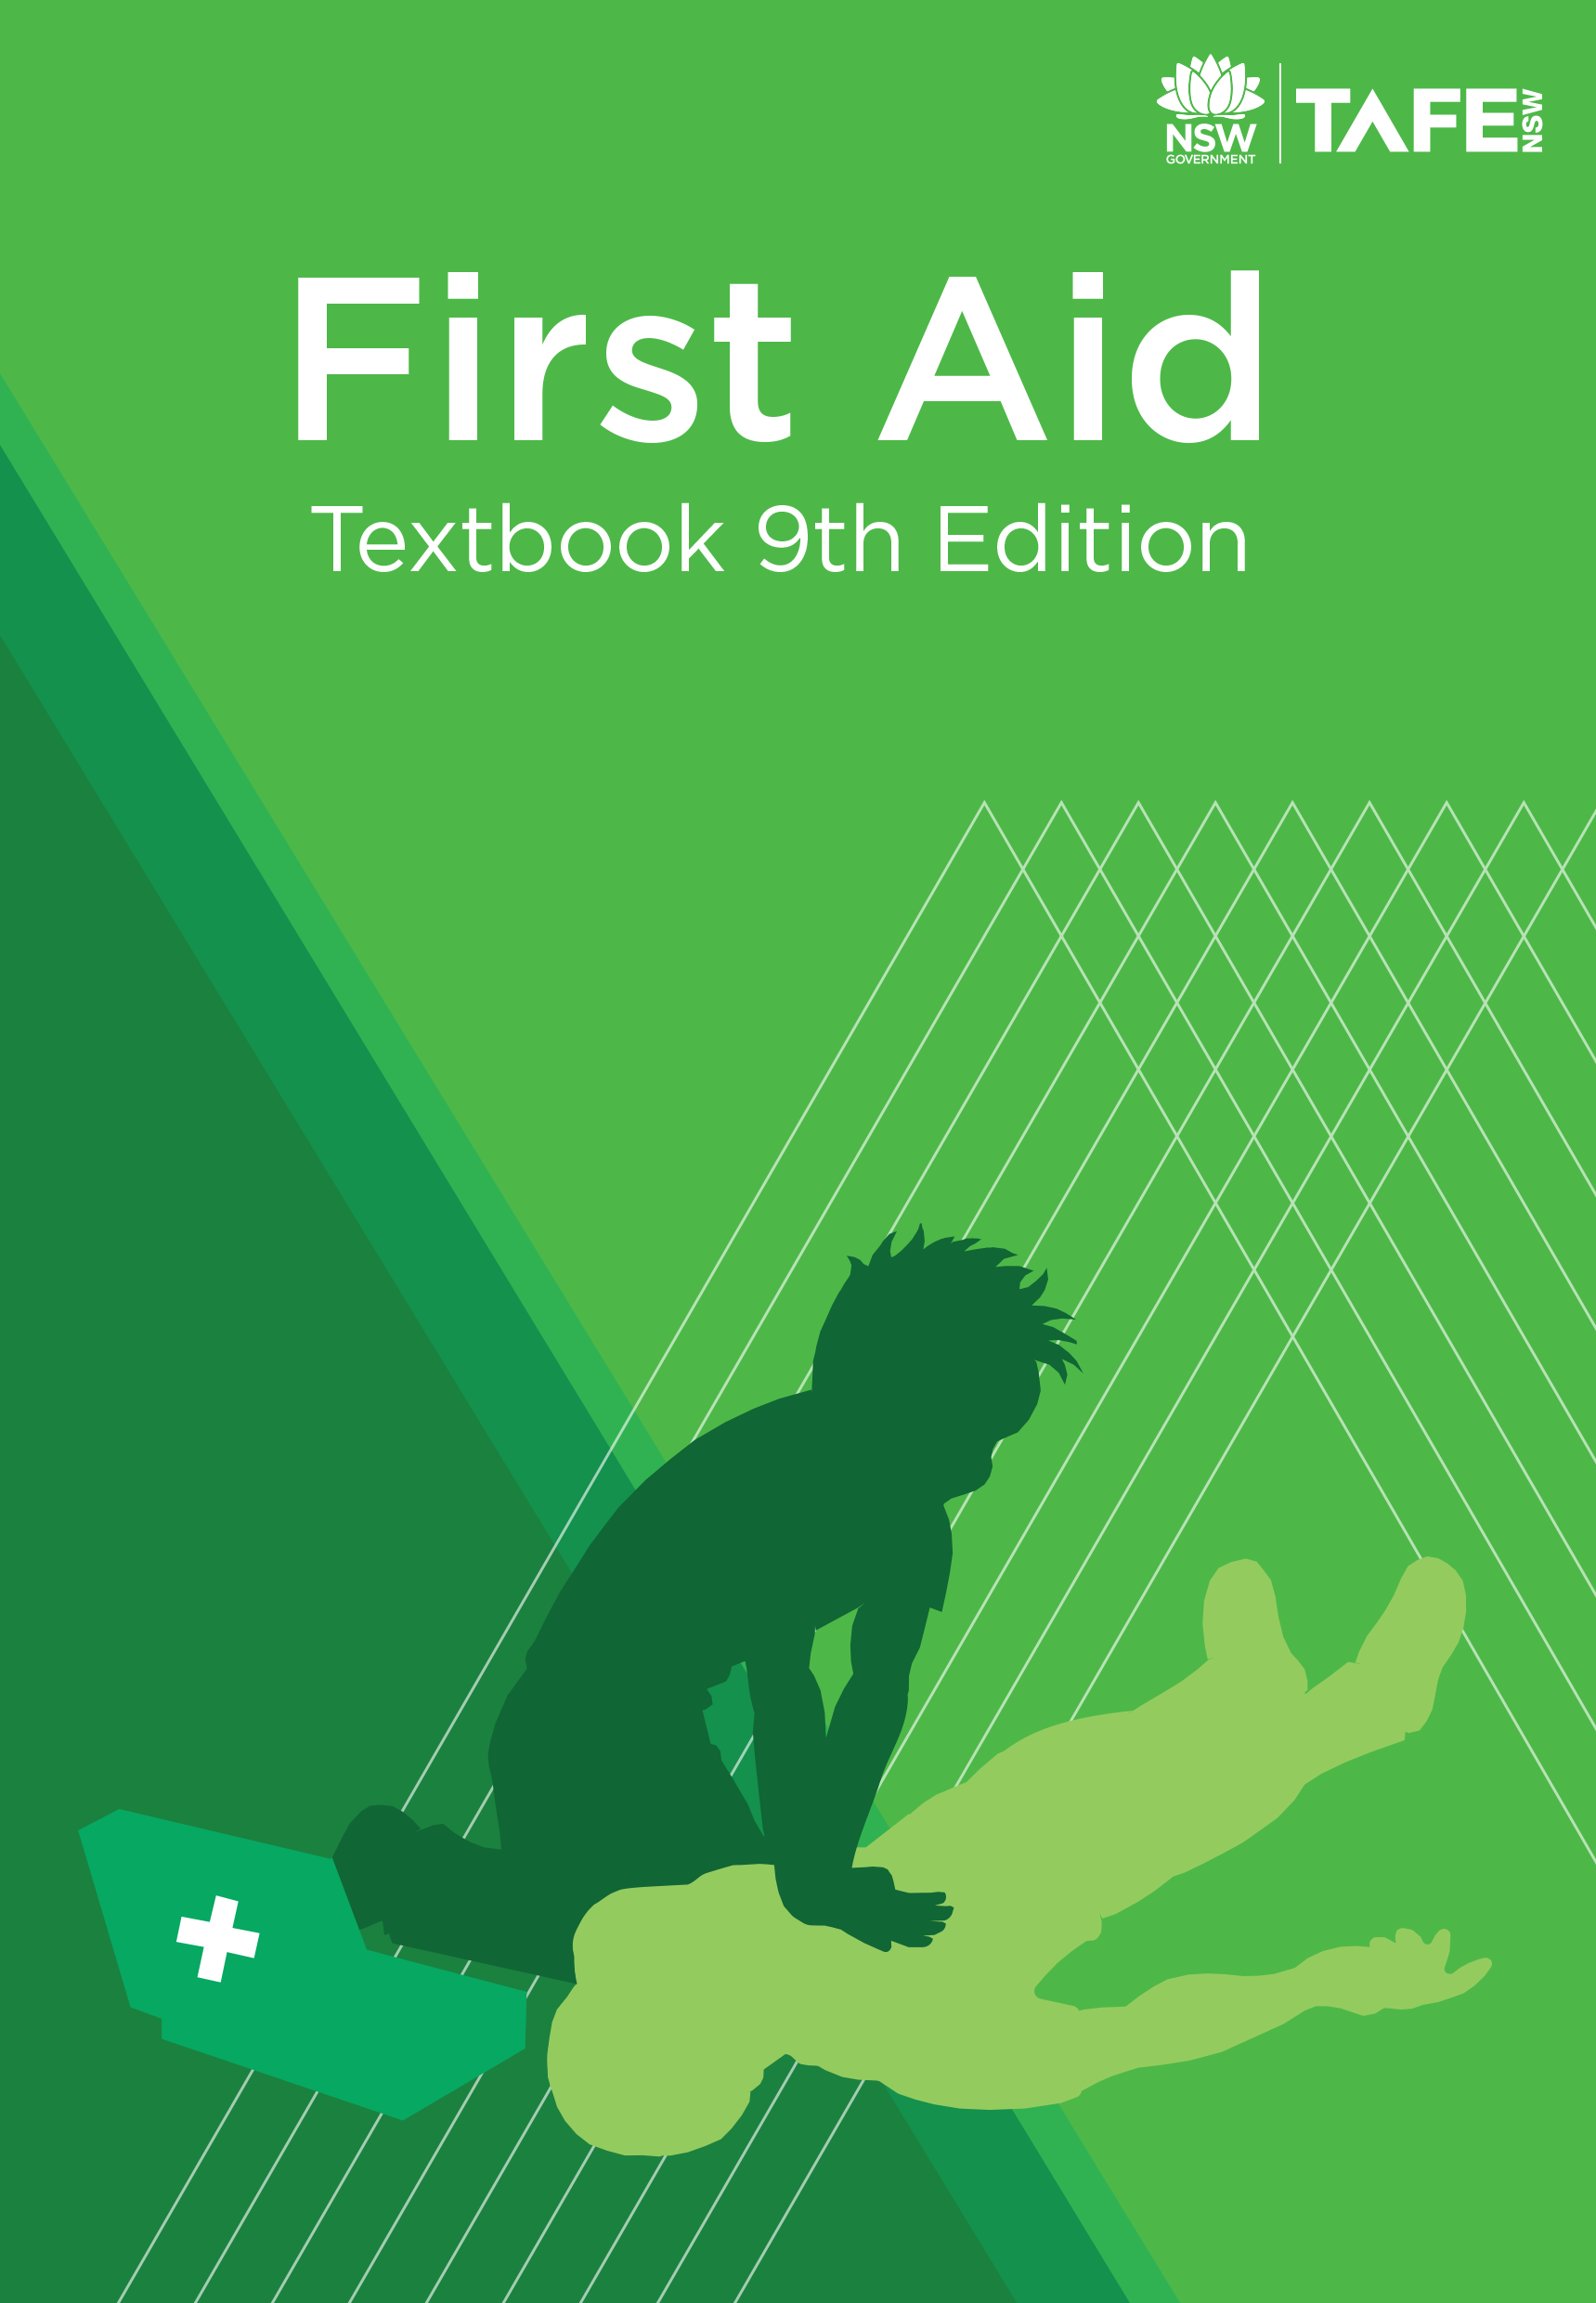 First Aid Textbook 9th Edition